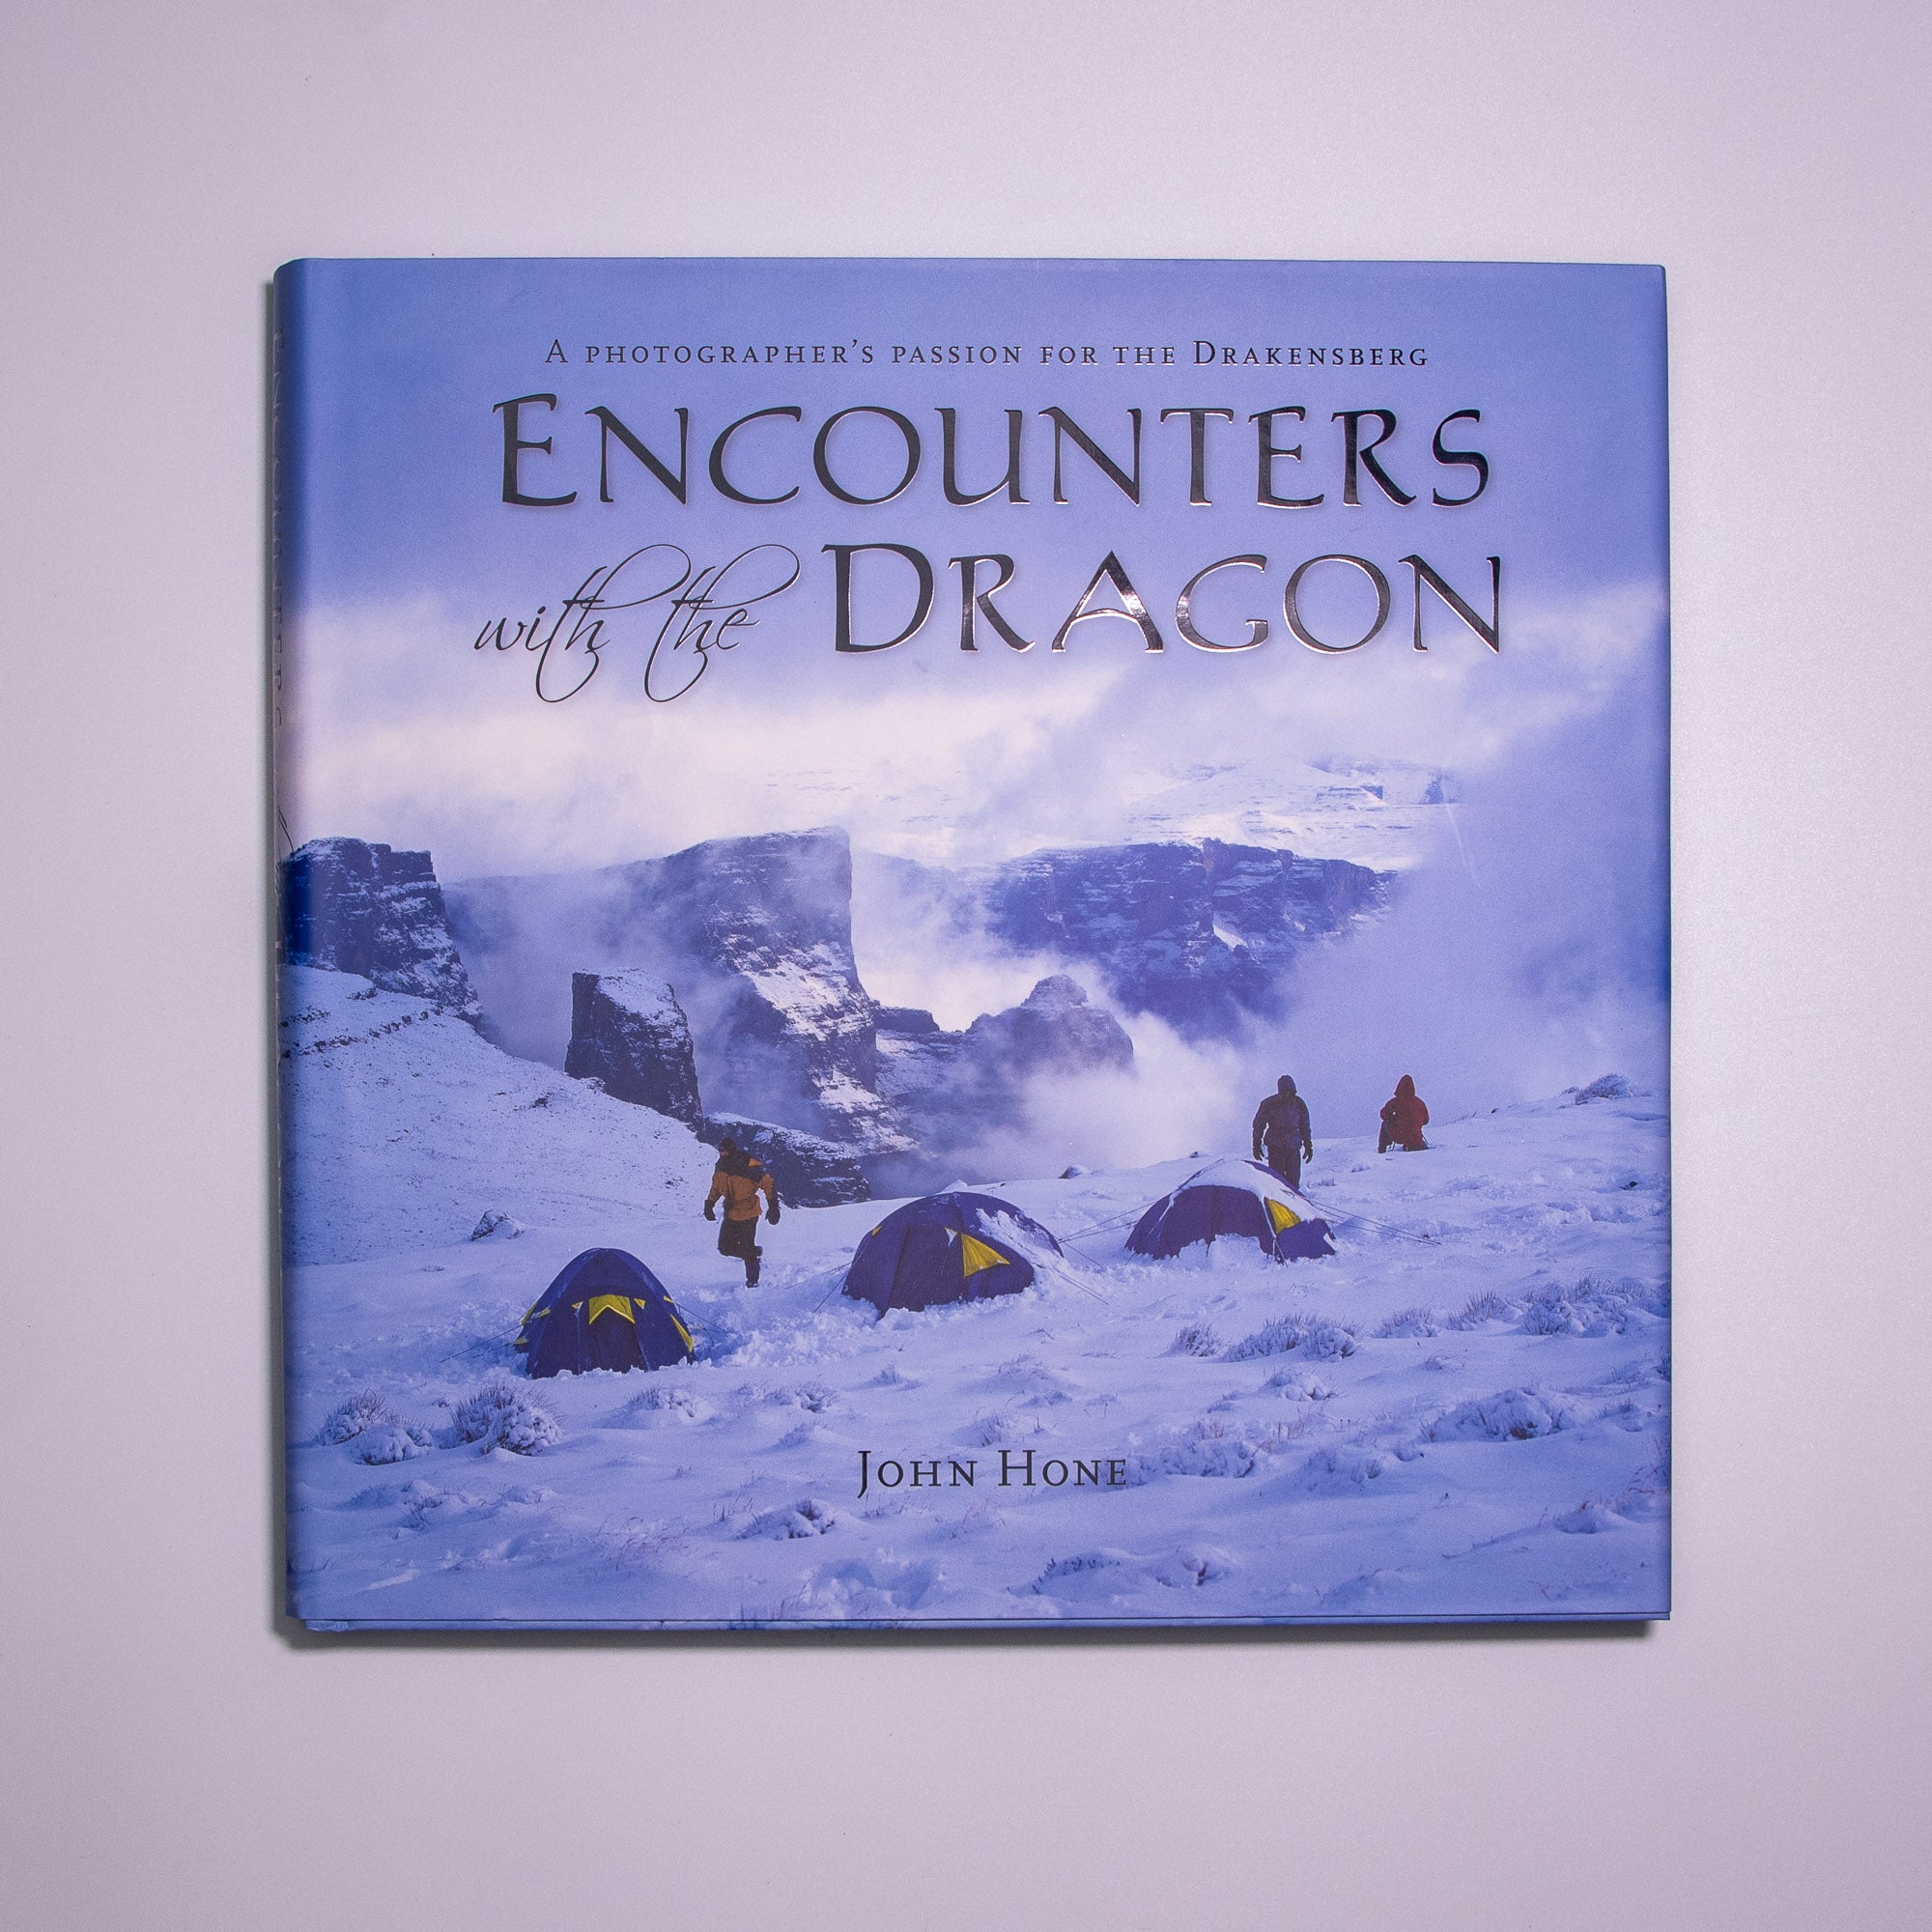 Encounters with the Dragon by John Hone